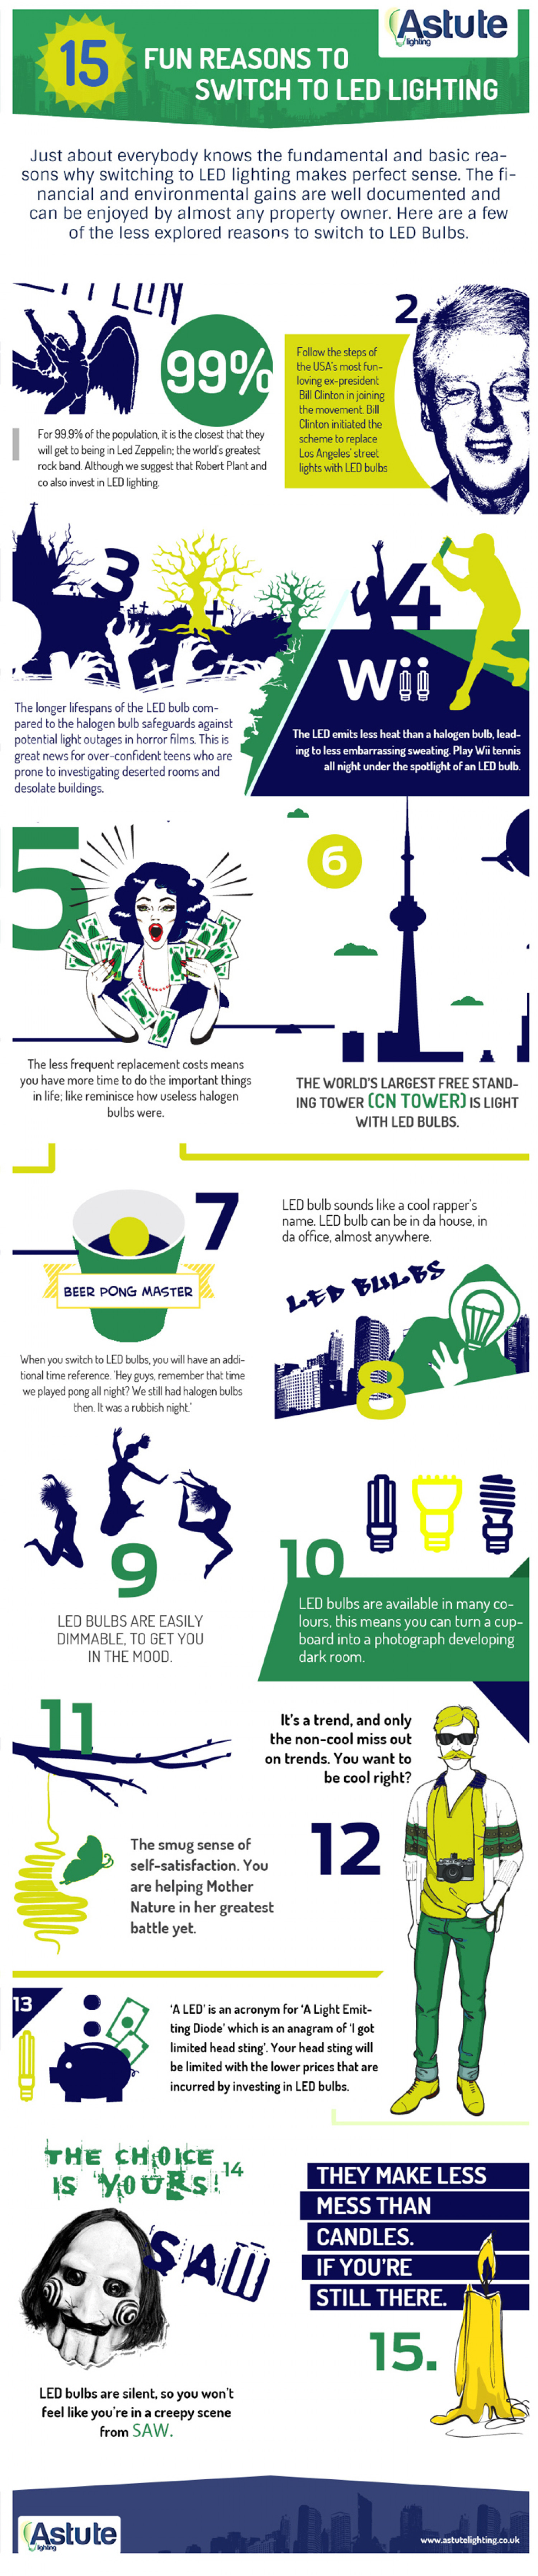 15 Benefits of Switching to LED Lighting Infographic